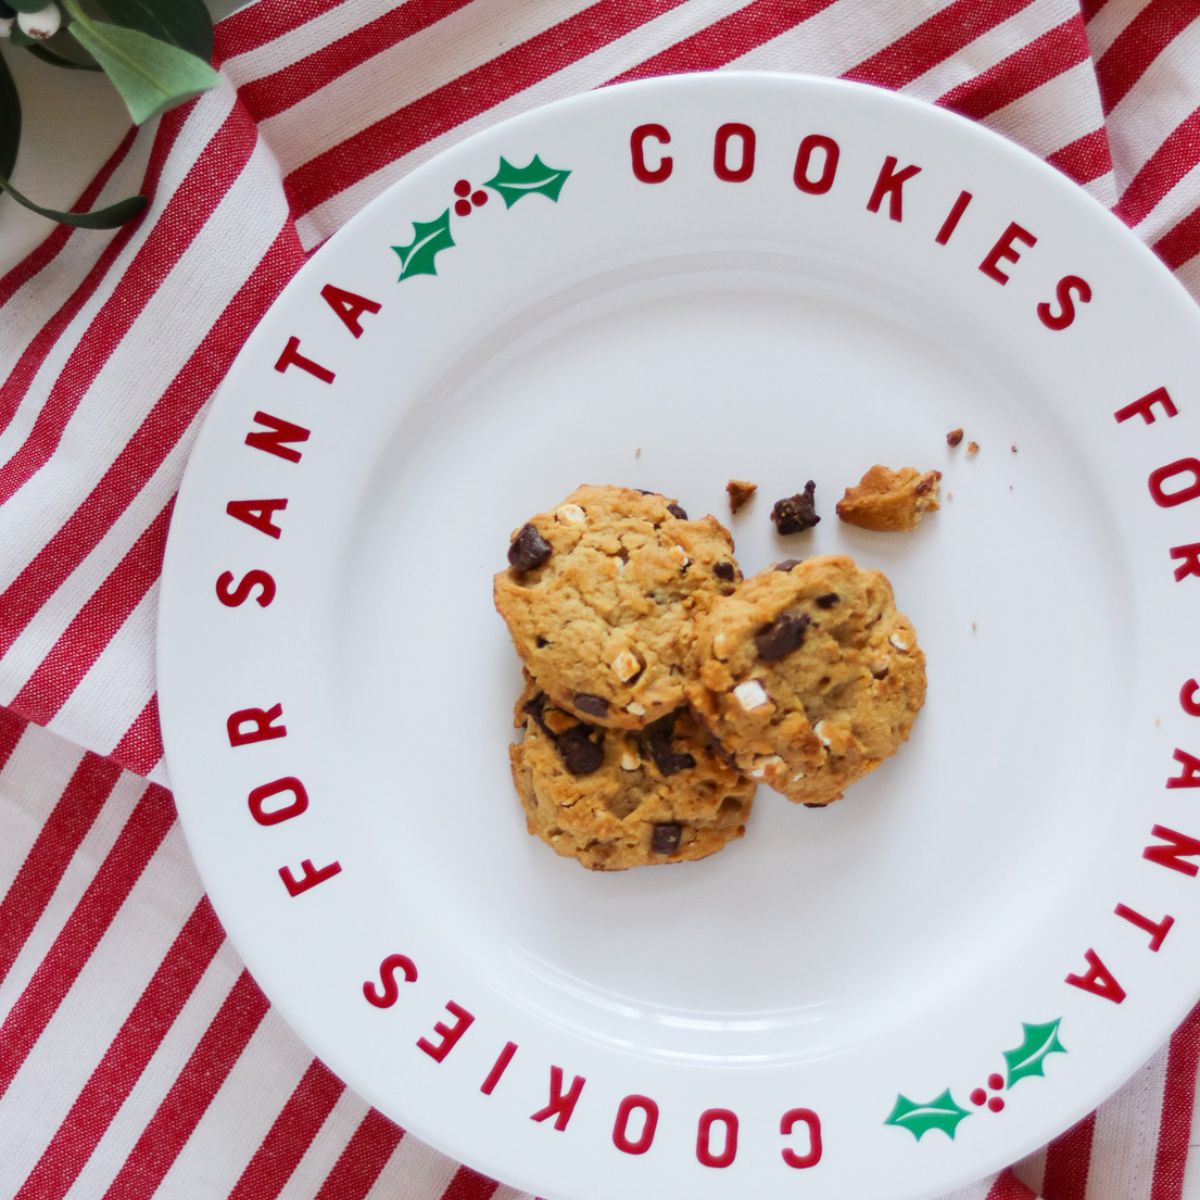 How to Make a Cookies for Santa Plate with Cricut